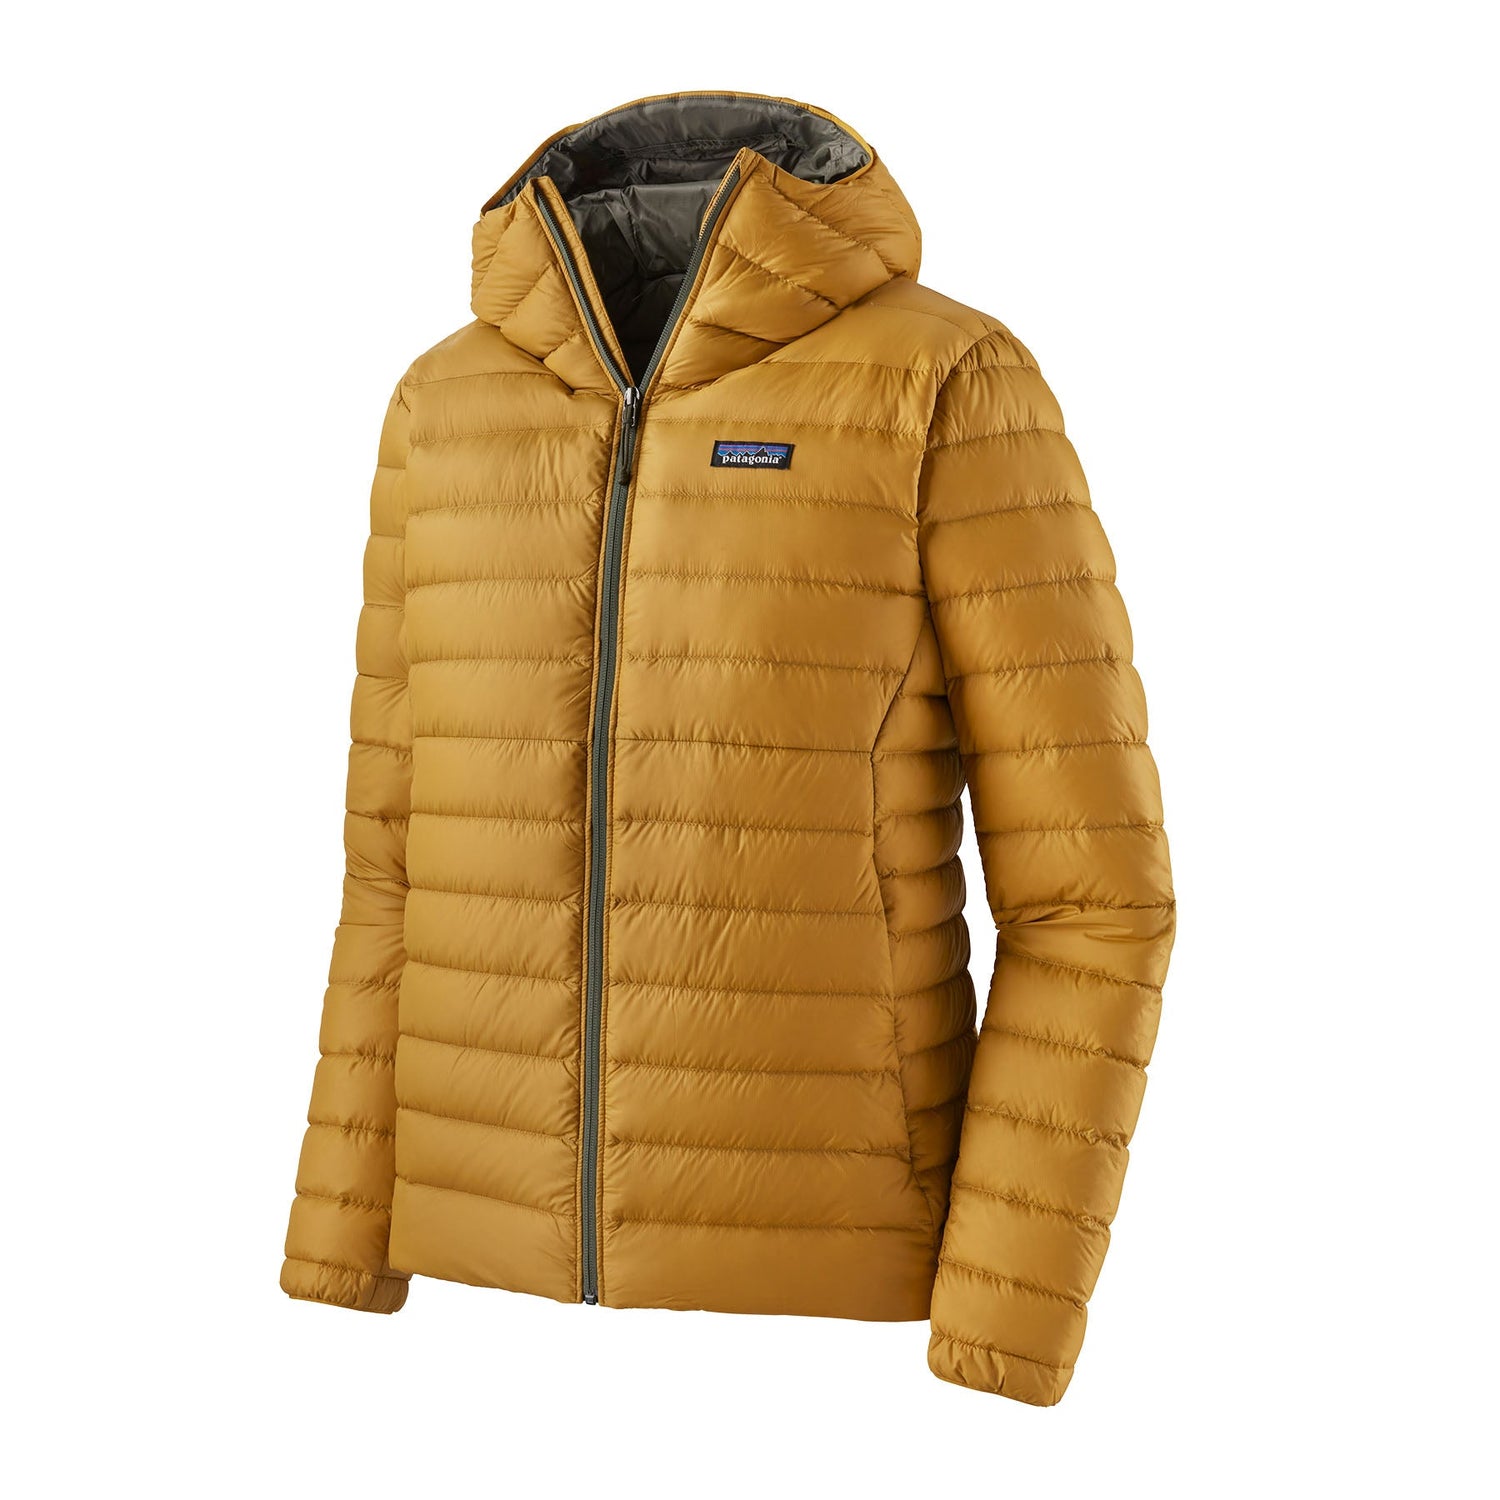 Patagonia M's Down Sweater Hoody - Recycled Nylon & RDS certified Down Cabin Gold Jacket